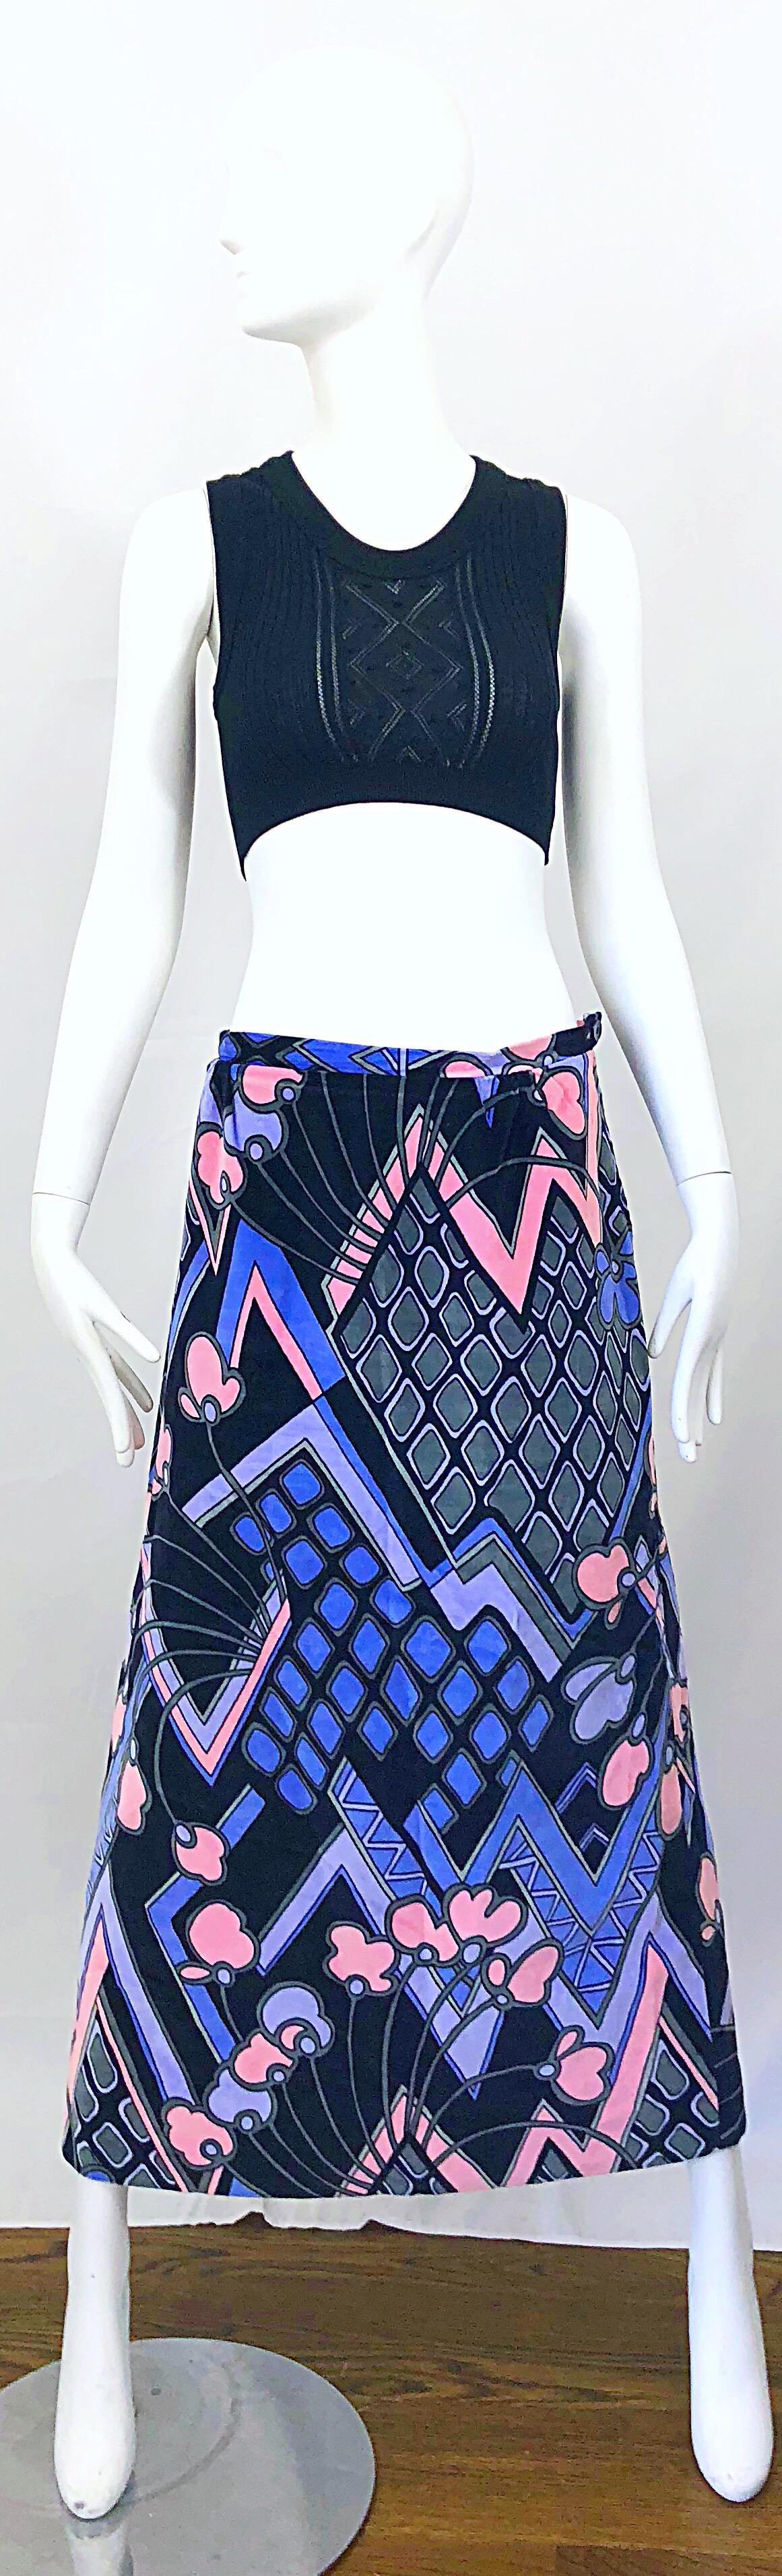 Rare 1970s NIEDIECK velvet Pucci style plus size maxi skirt! Features super soft velvet Niedieck is known for. Hidden zipper up the side with button closure. Vibrant colors of purple, lavender, pink, blue and black. Can easily be dressed up or down.